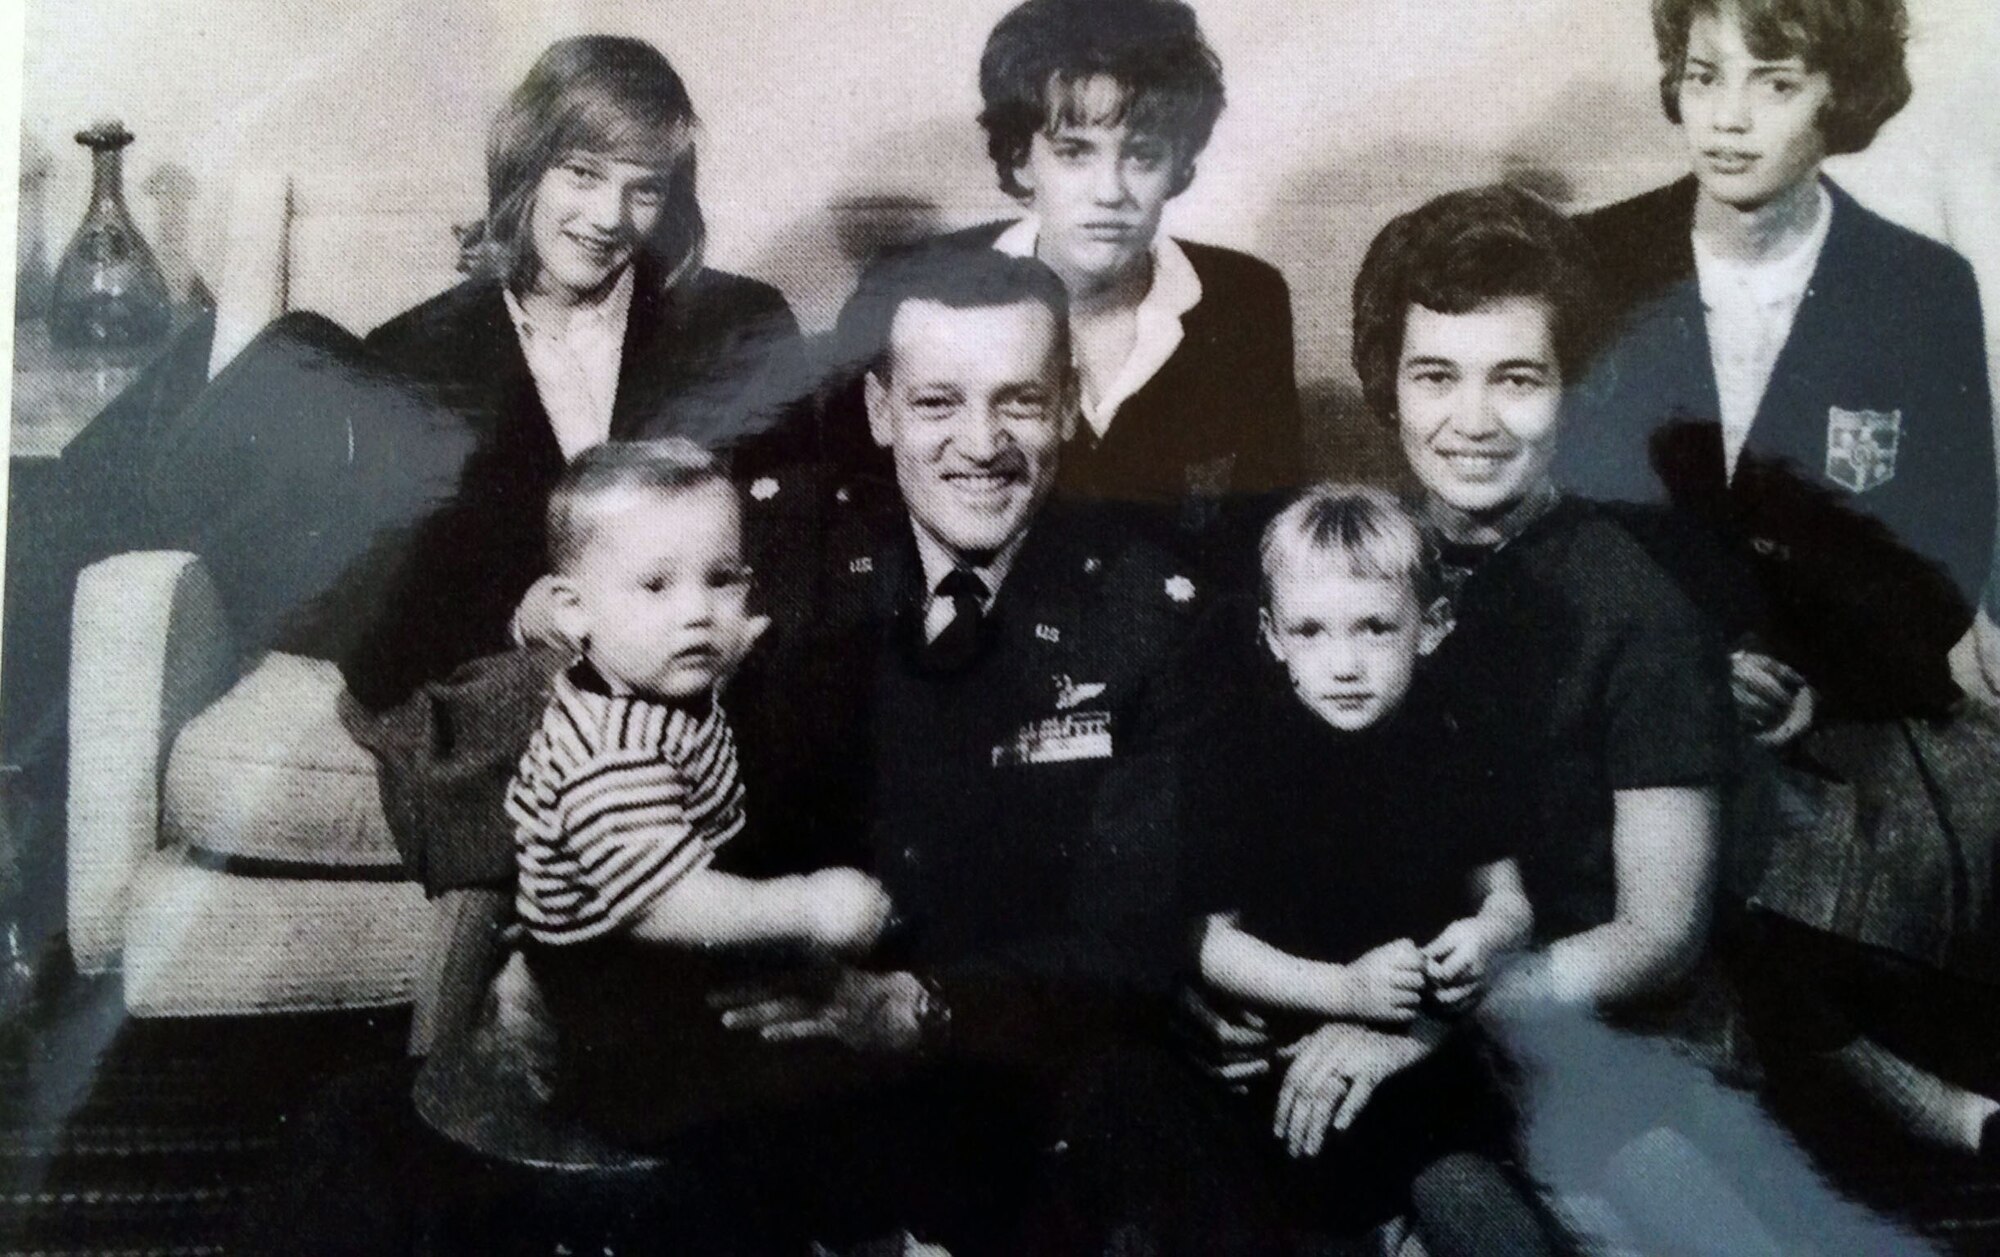 Maureen Kozak, the wife of Col. Raymond A. Kozak, 512th Airlift Wing commander at Dover Air Force Base, Del., sits on her mother’s lap for a family photo taken in 1963 in the United Kingdom. Her brother Brian sits on the lap of their father Maj. Kelly Cook, who was declared missing in action four years after this photo was taken. Mrs. Joanne Cook was expecting their sixth child in this photo. (Submitted photo)  